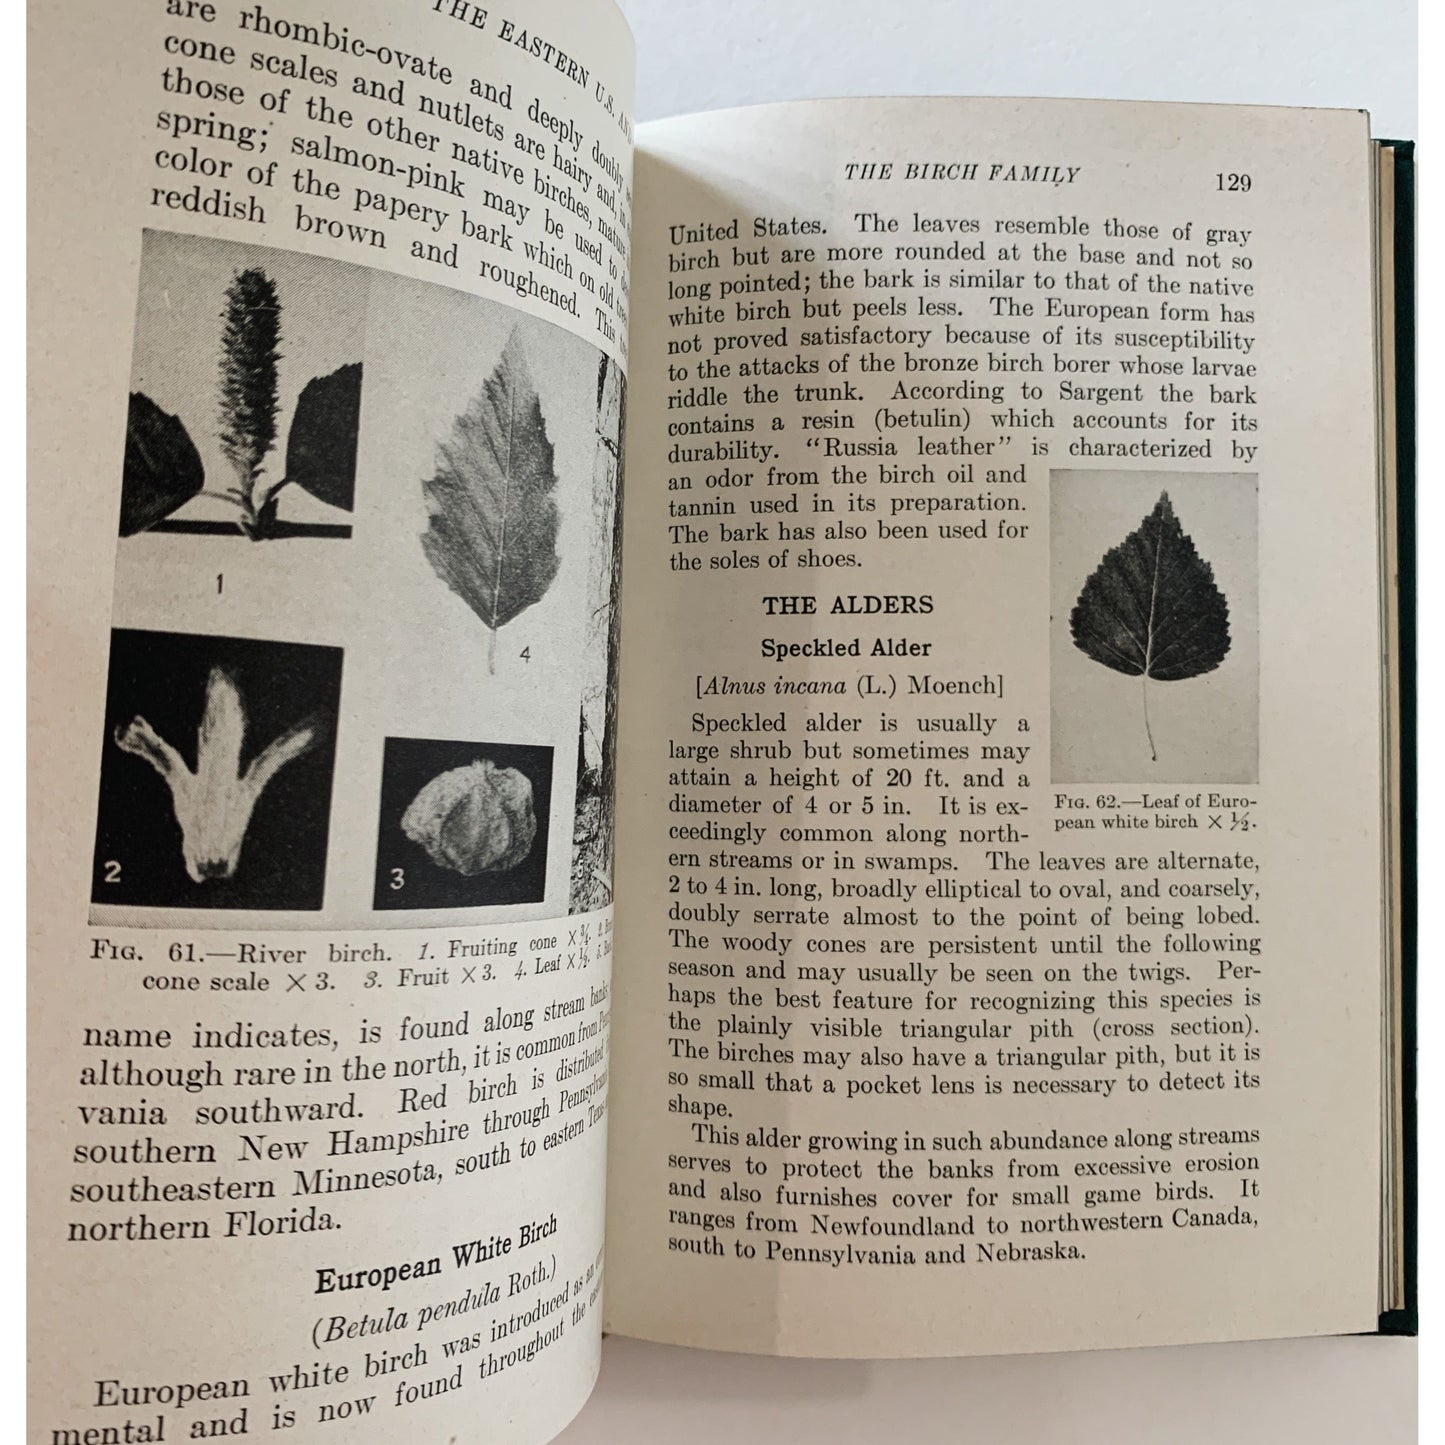 Trees of the Eastern United States and Canada, 1942, Whittlesey House Field Guide